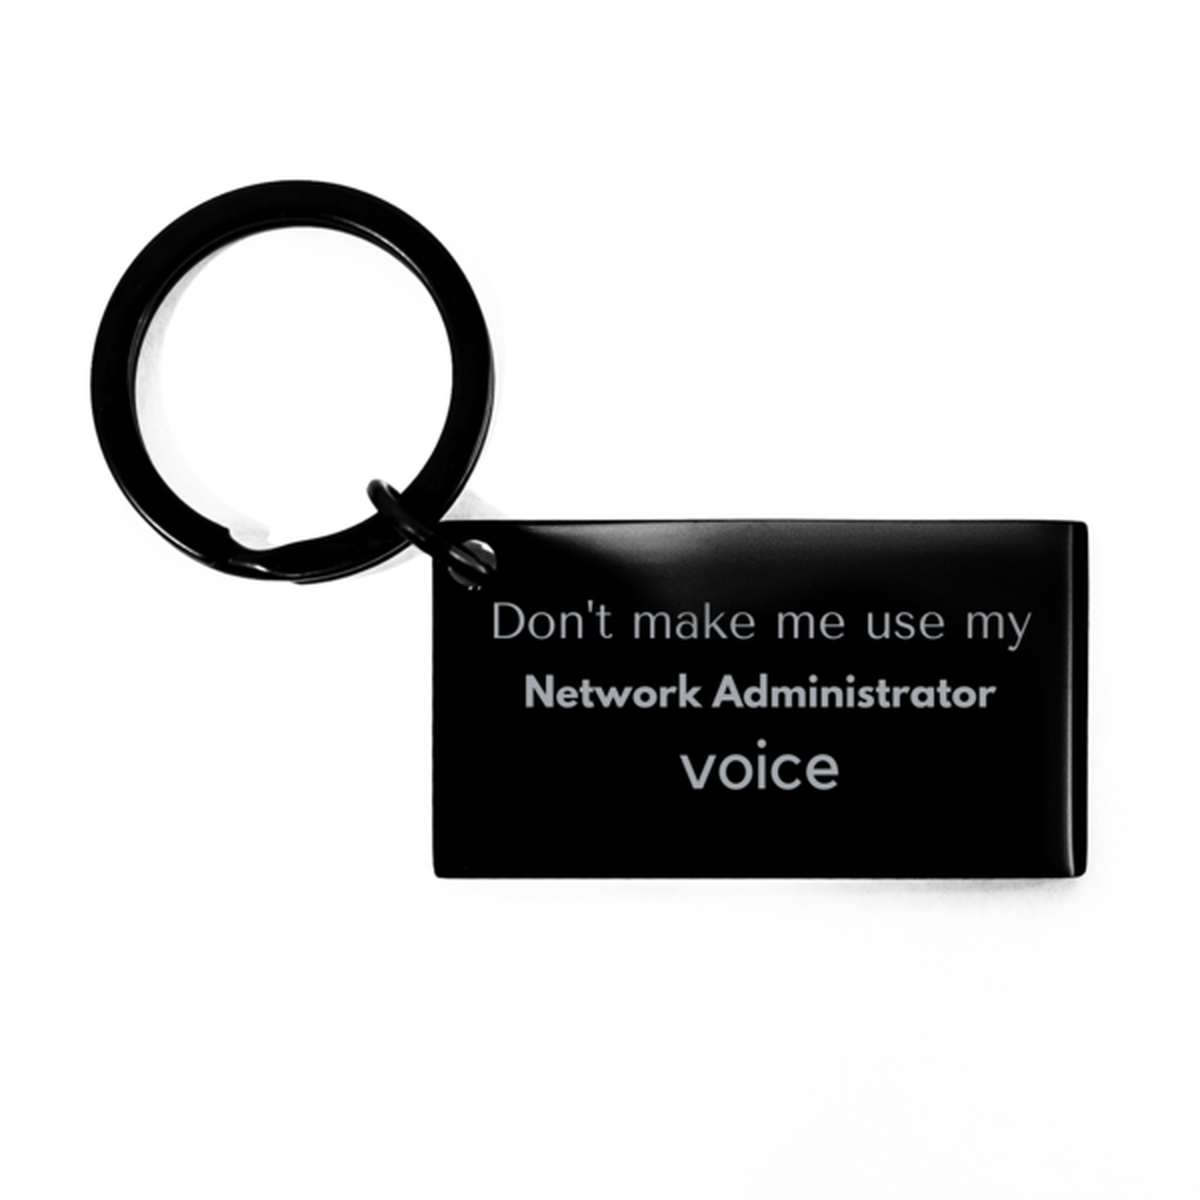 Don't make me use my Network Administrator voice, Sarcasm Network Administrator Gifts, Christmas Network Administrator Keychain Birthday Unique Gifts For Network Administrator Coworkers, Men, Women, Colleague, Friends